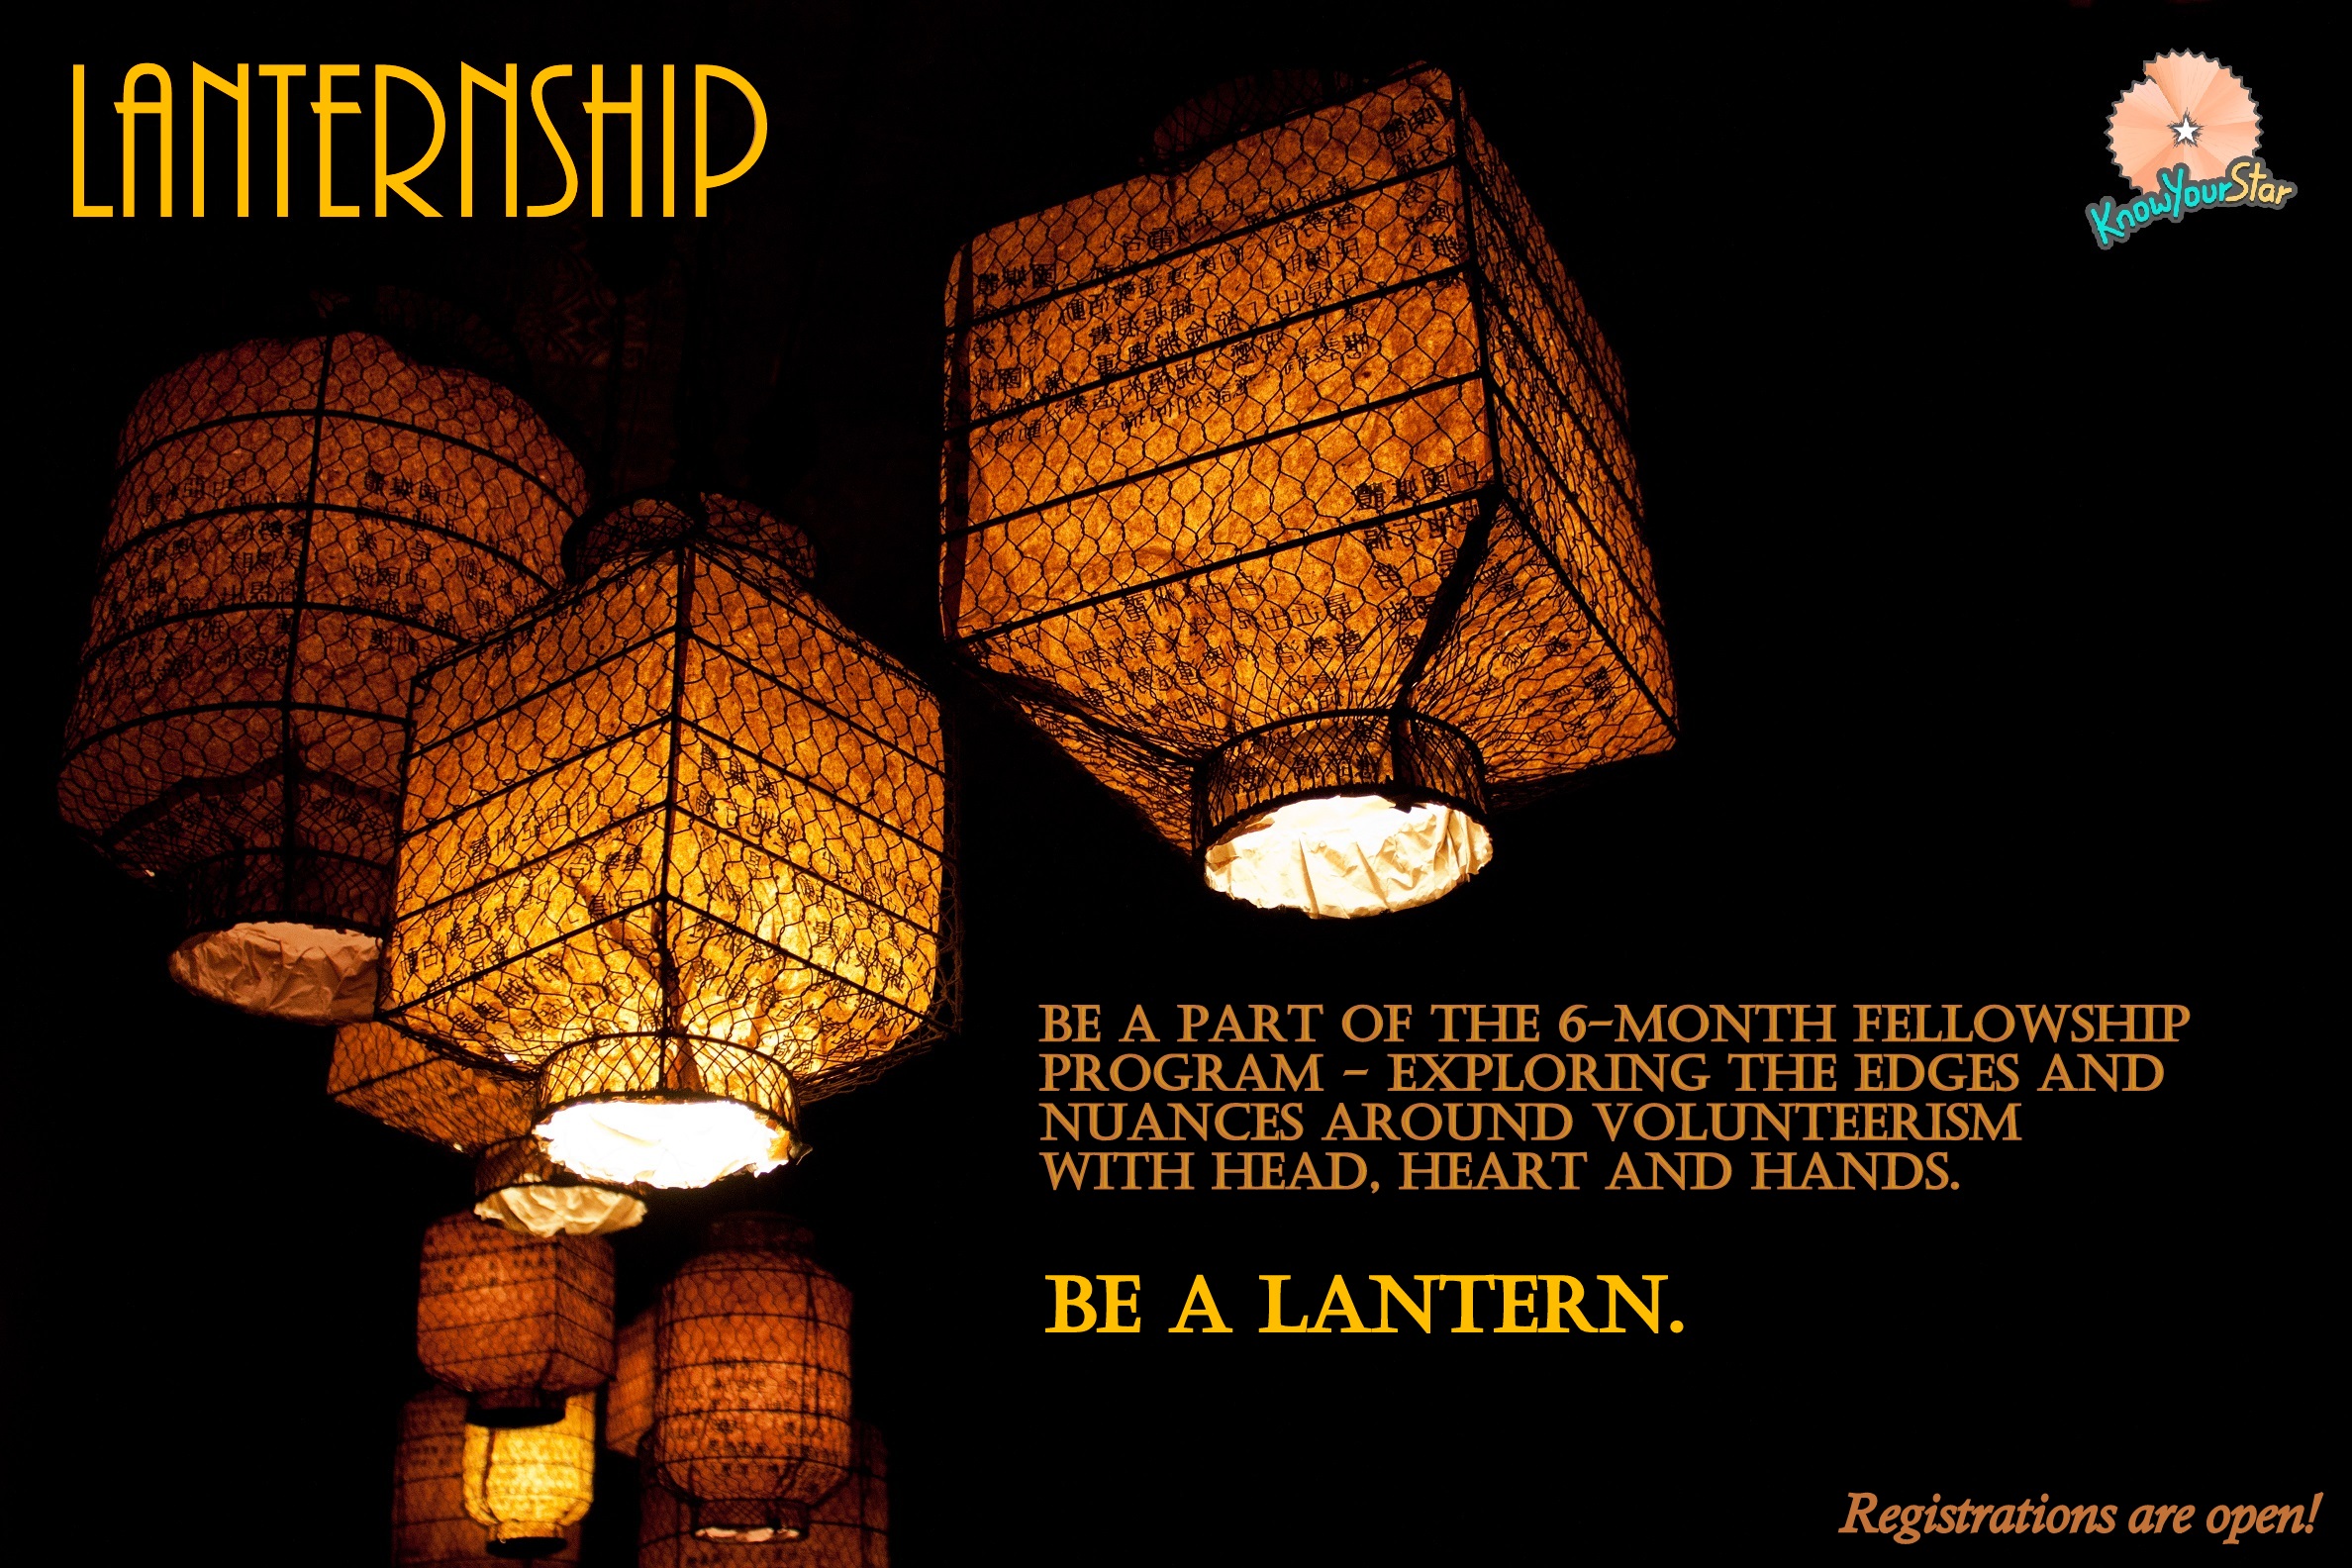 Thursday Email – If You Light A Lantern For Another, It Will Also Brighten Your Own Way